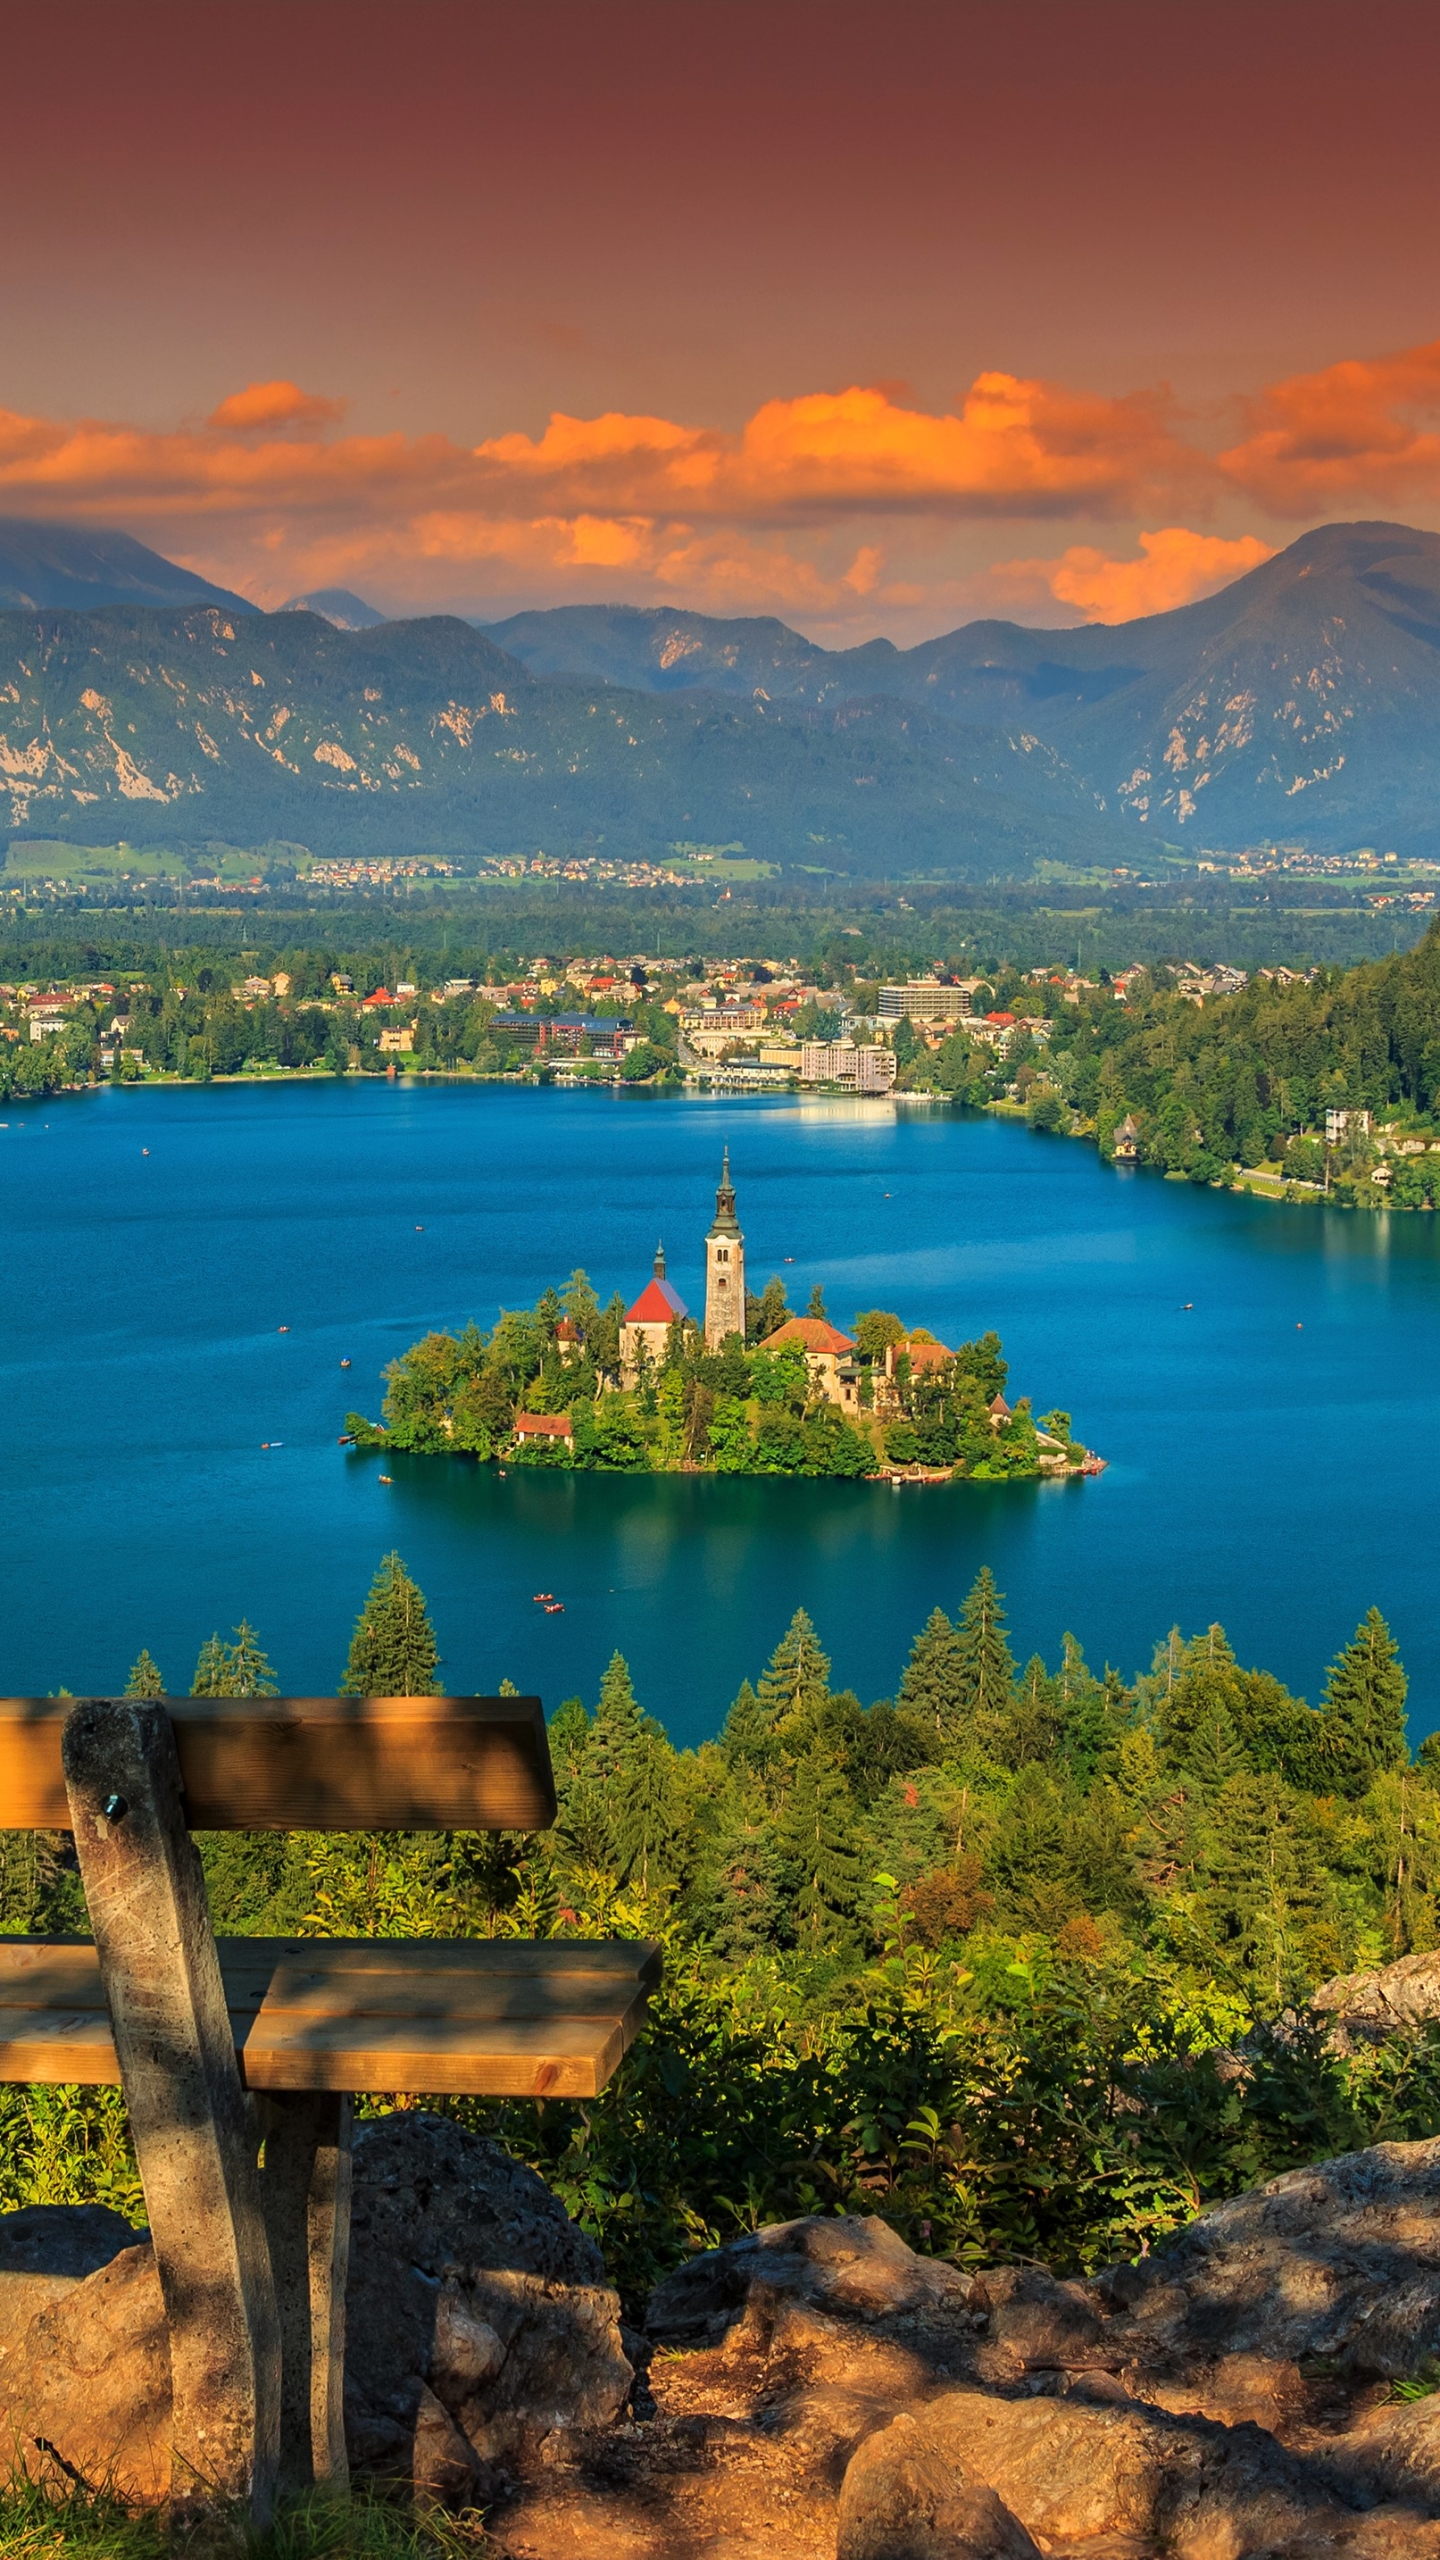 View of Lake Bled from the Bench